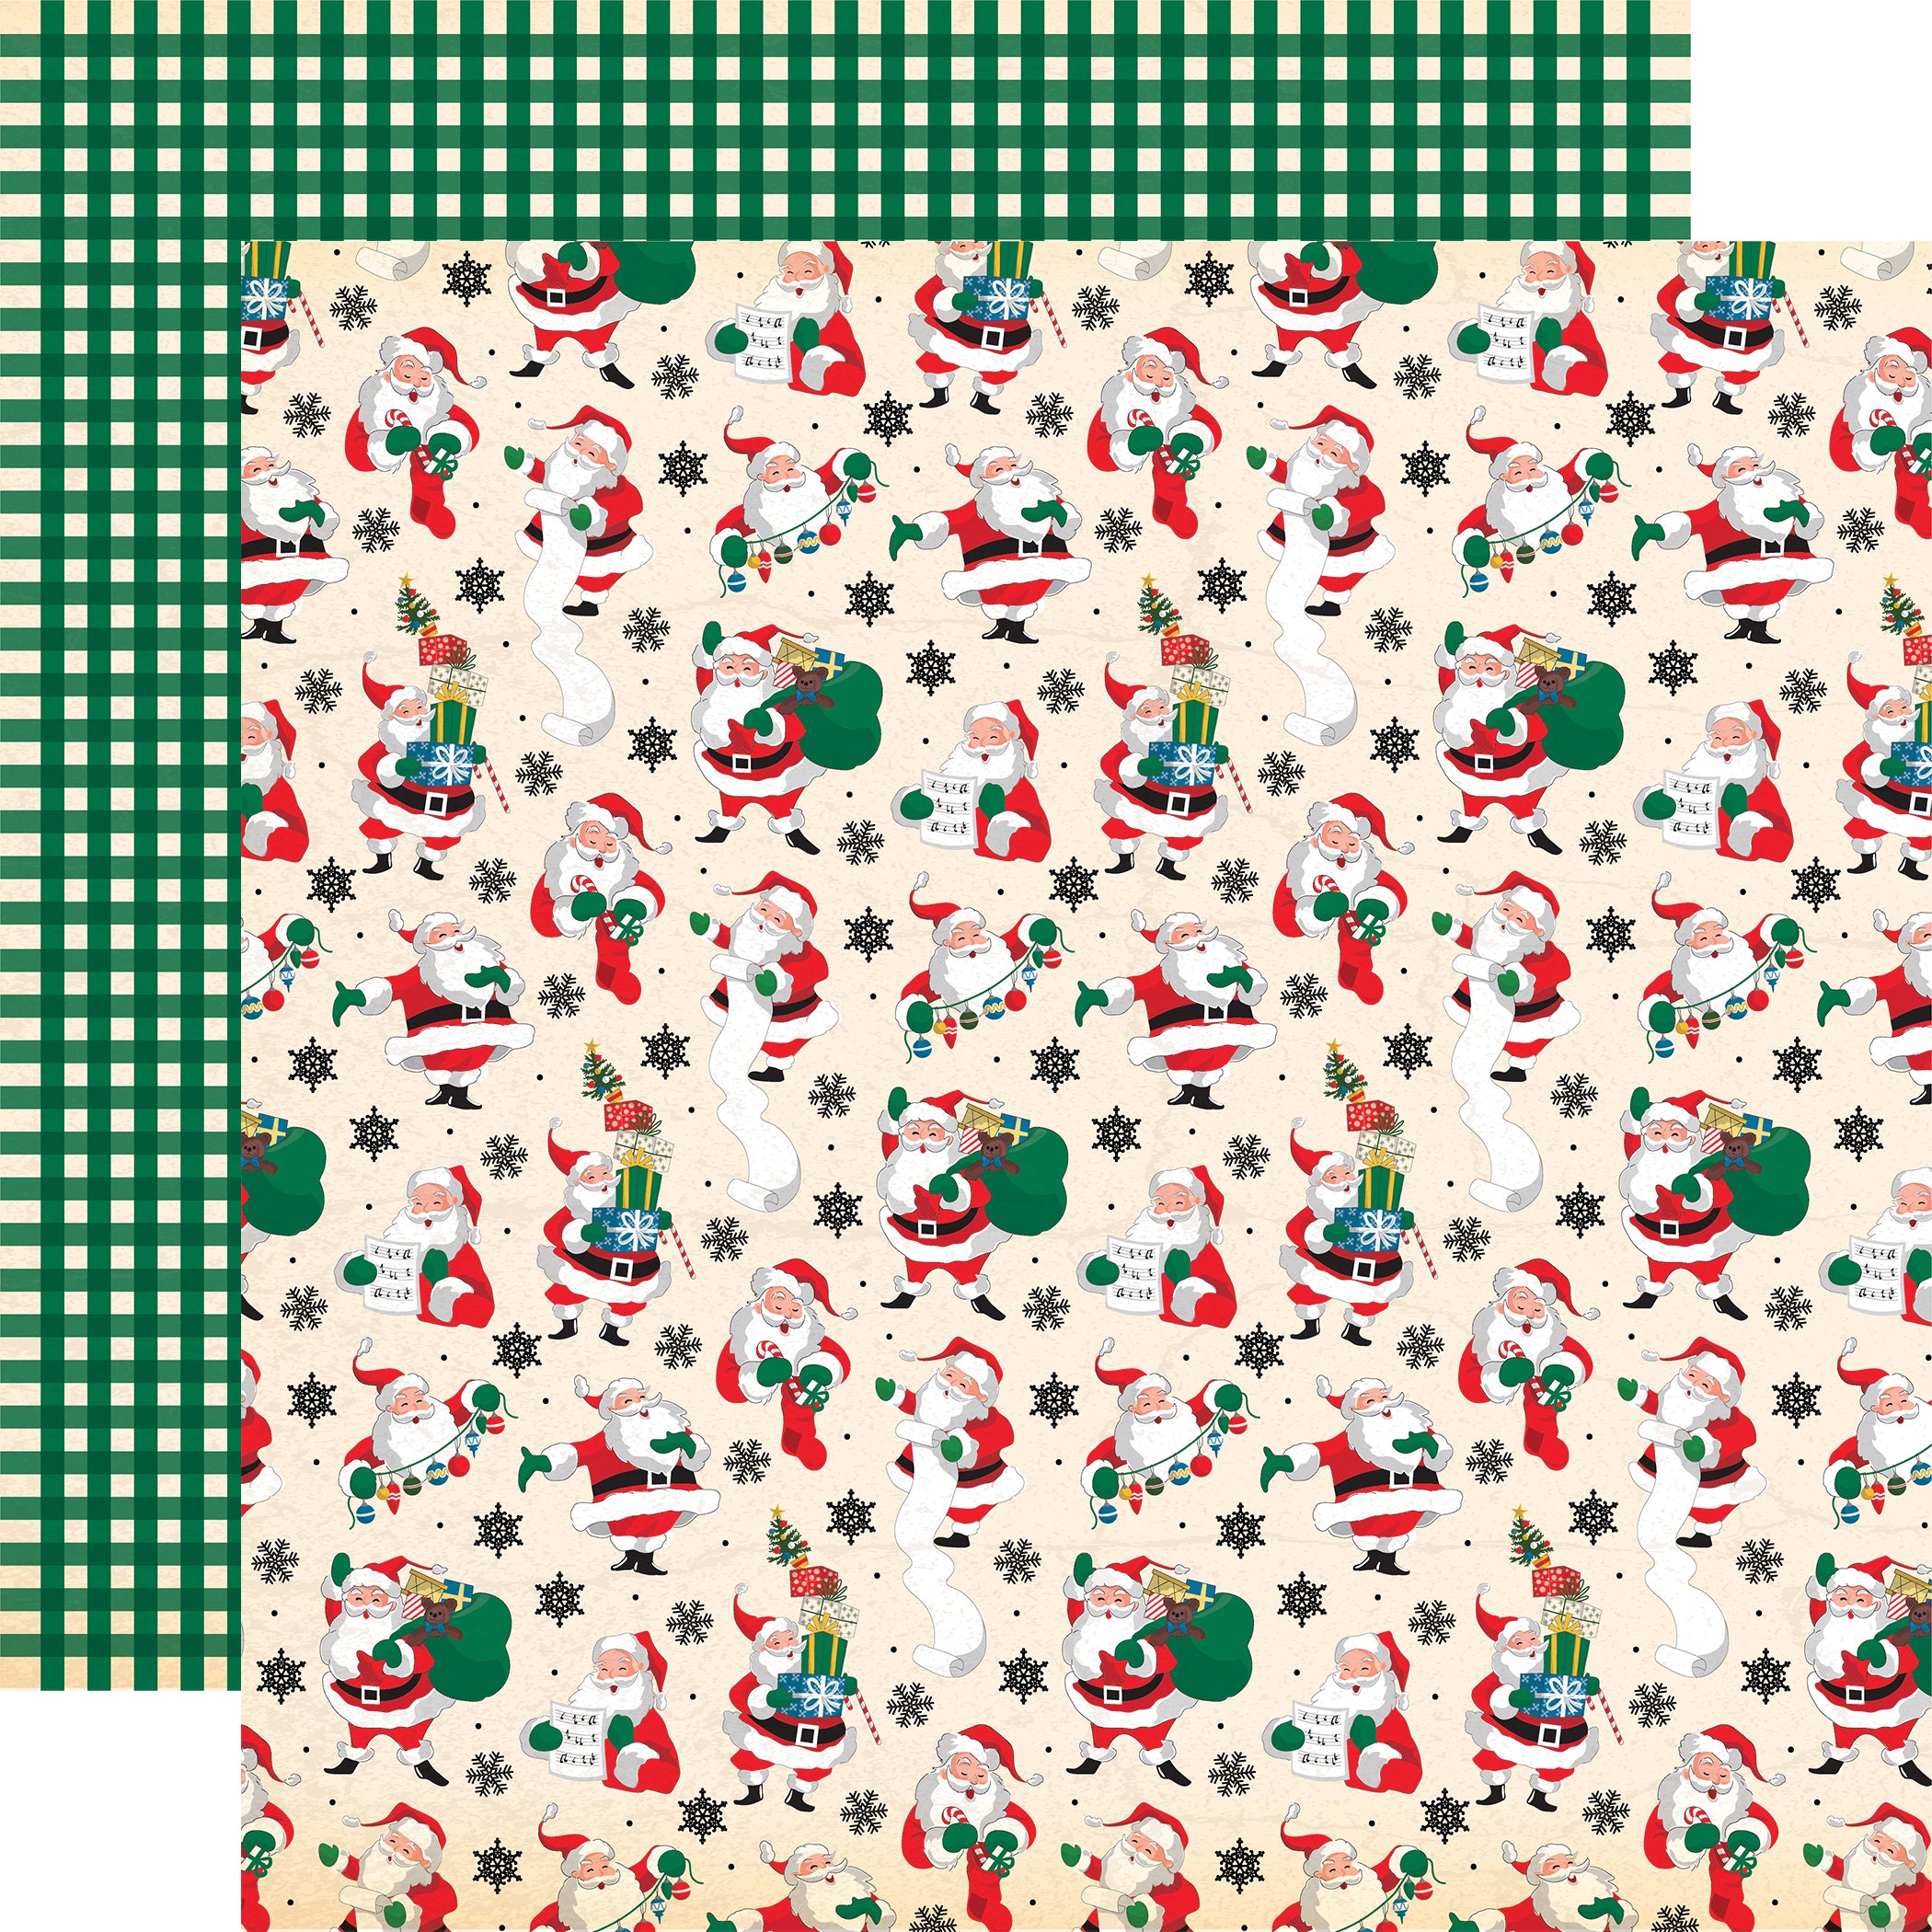 Season's Greetings Collection Christmas Is Coming 12 x 12 Double-Sided Scrapbook Paper by Carta Bella